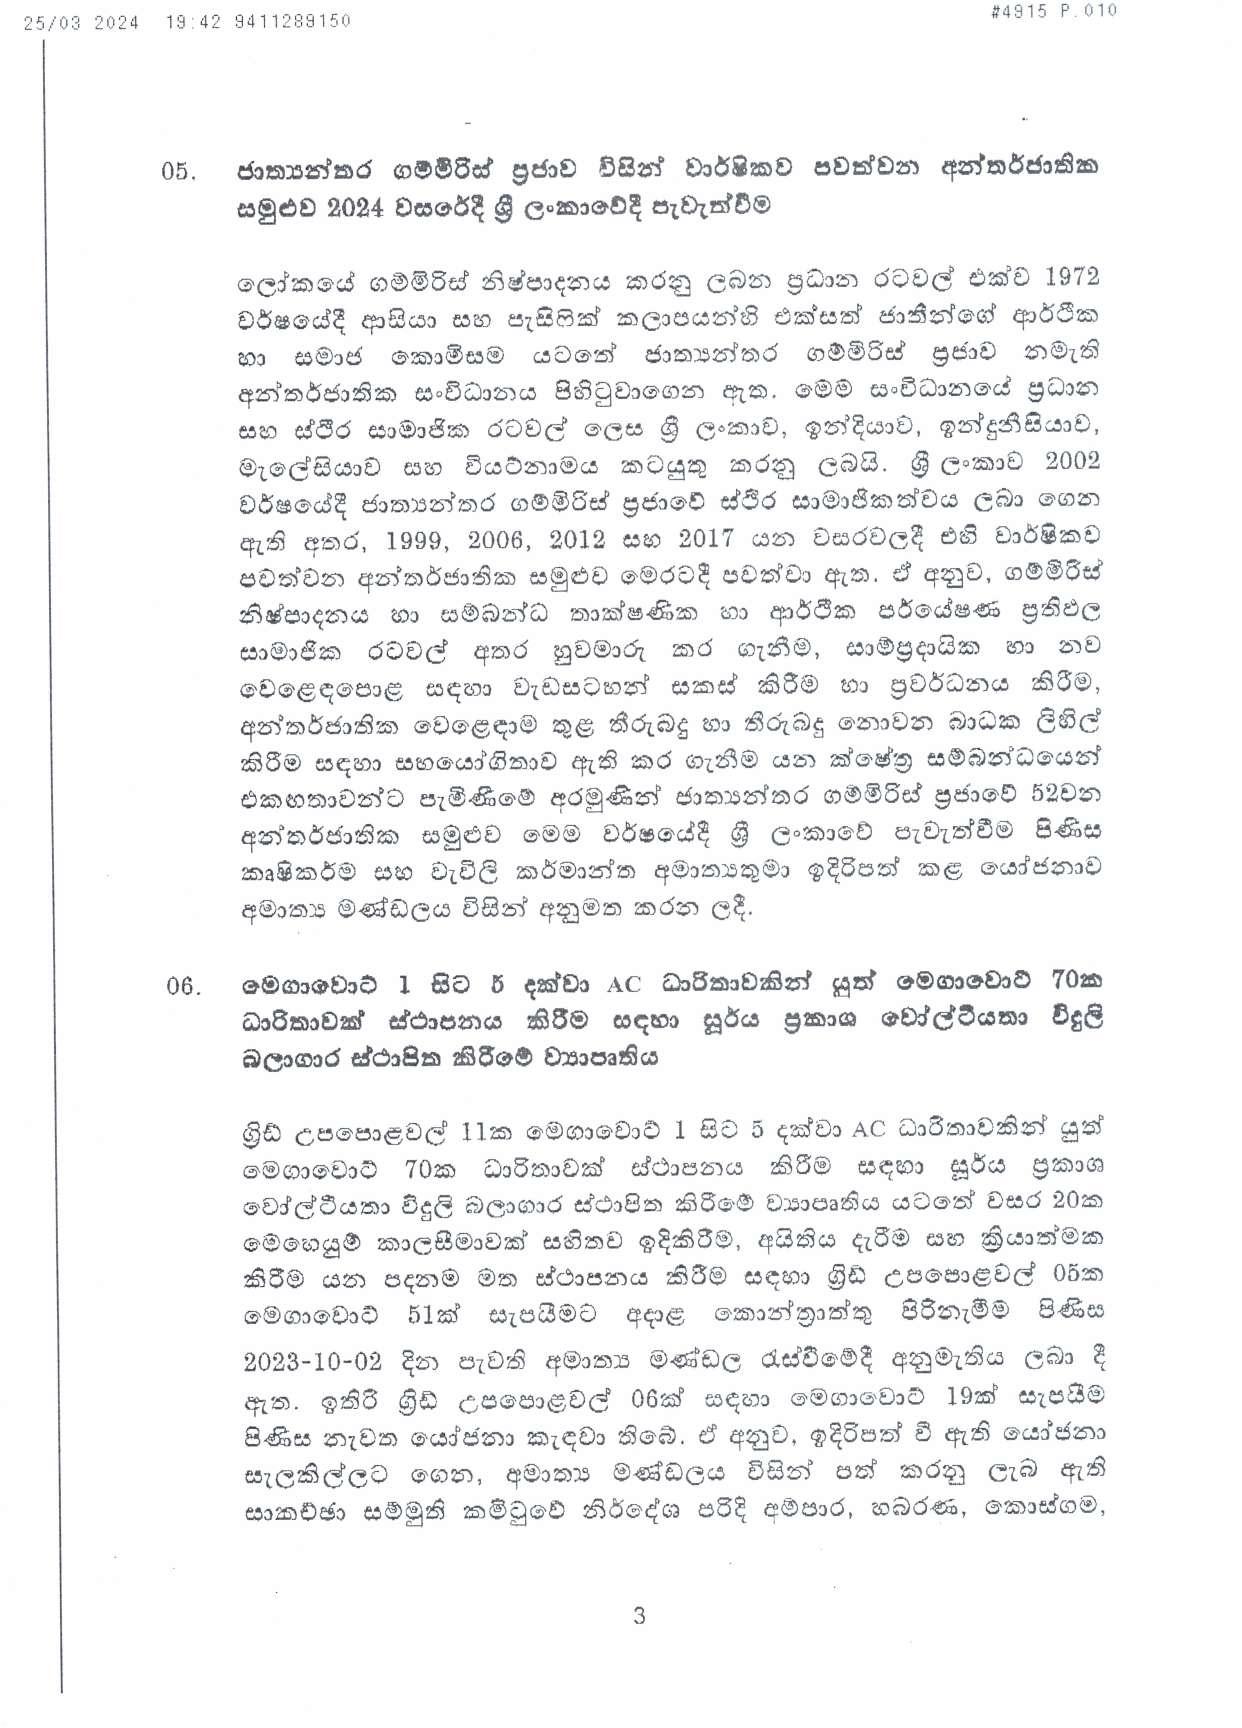 Cabinet Decision on 25.03.2024 page 003